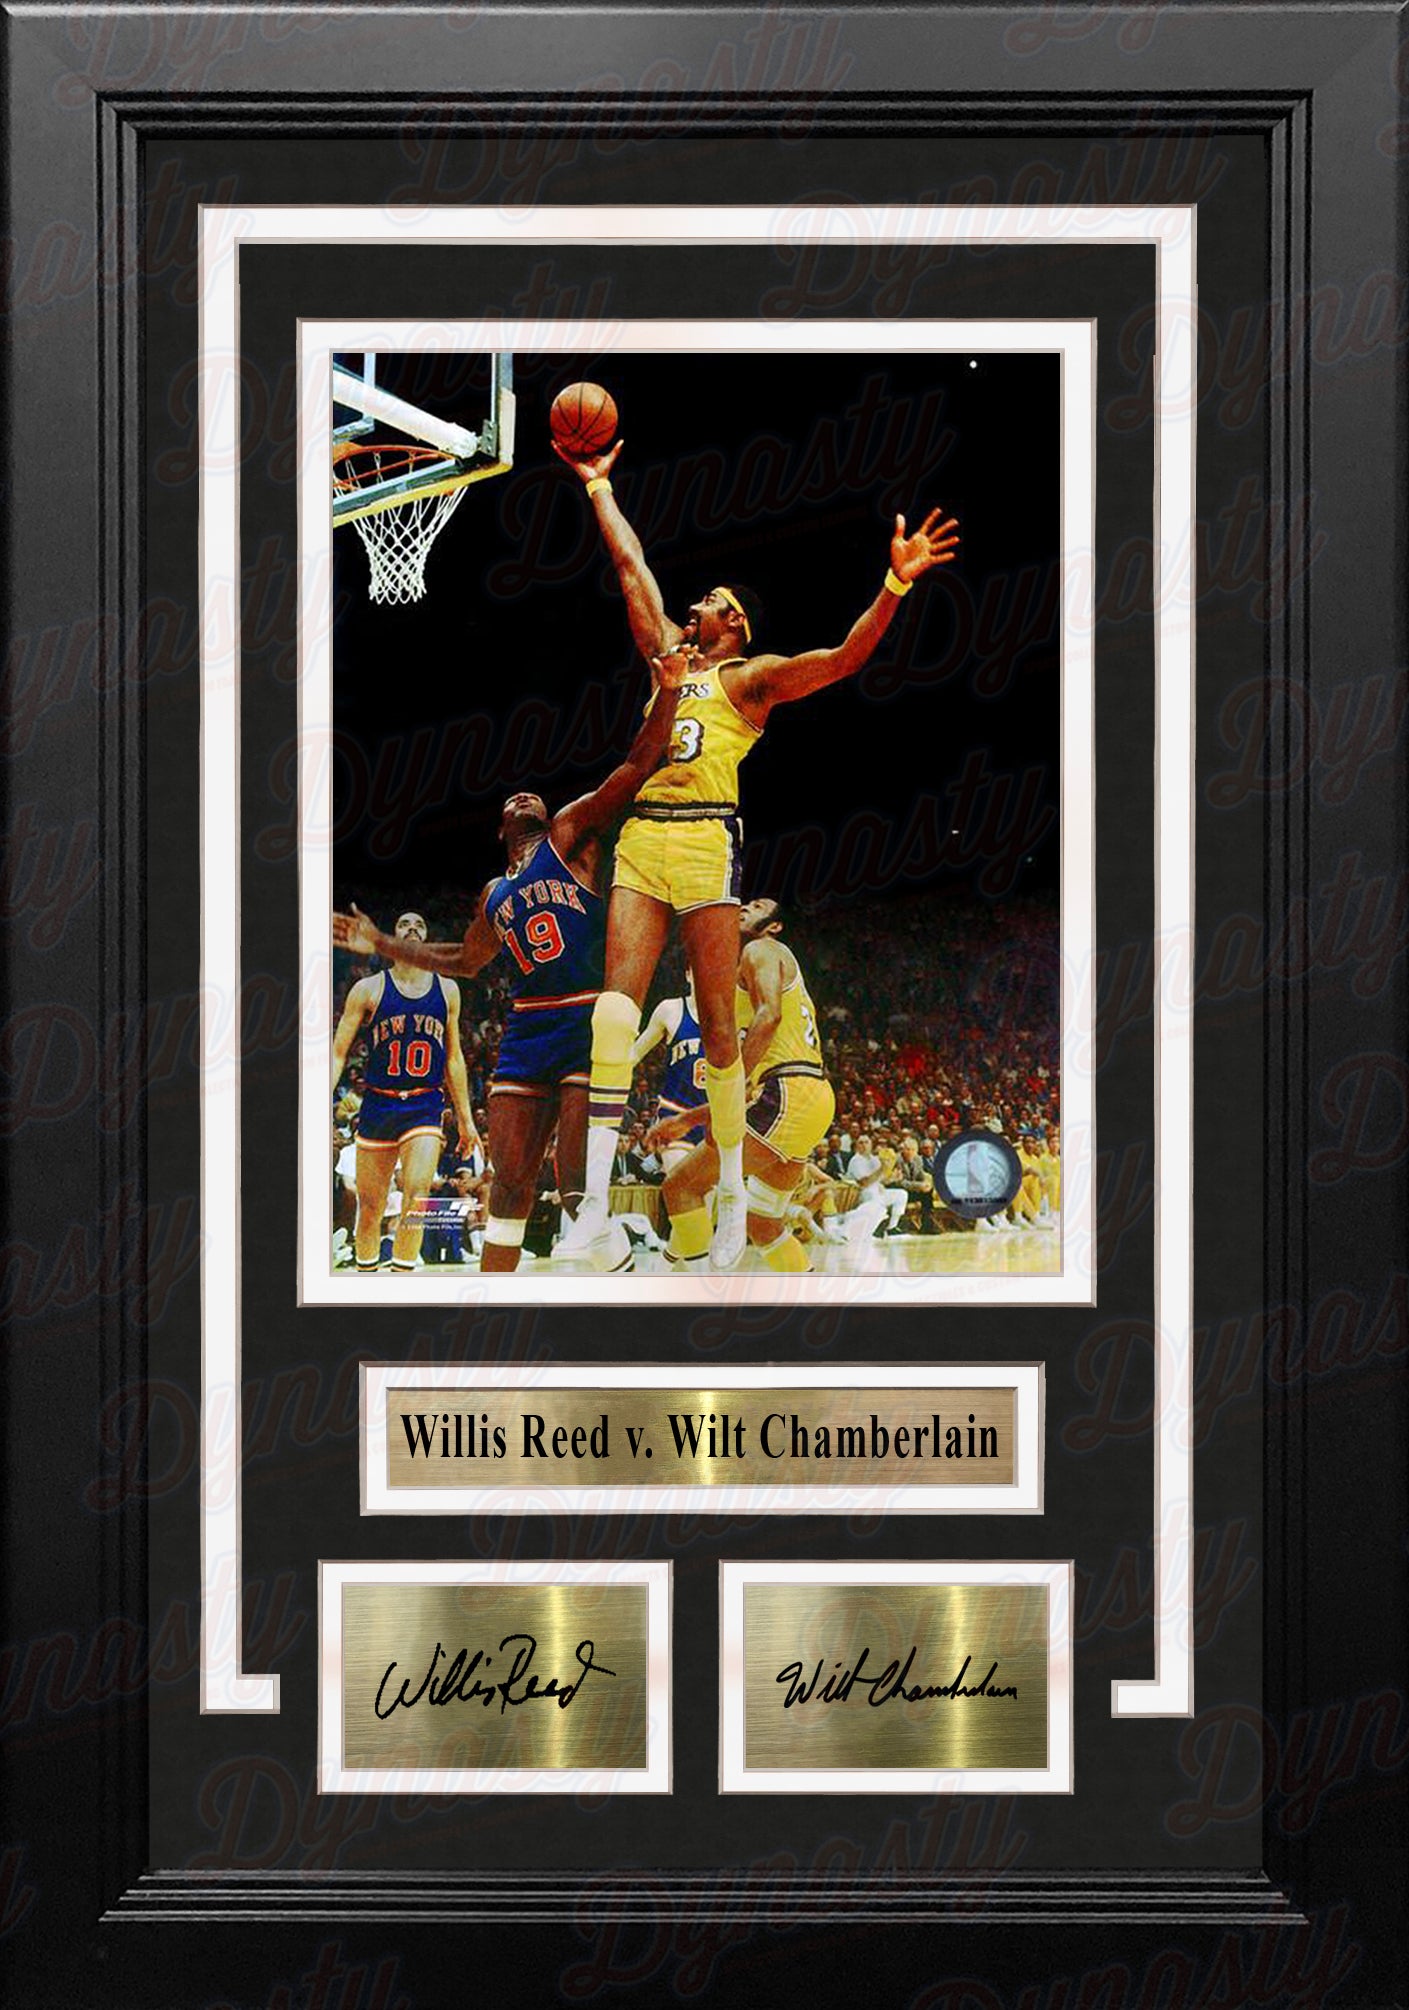 Wilt Chamberlain v. Willis Reed 8" x 10" Framed Basketball Photo with Engraved Autographs - Dynasty Sports & Framing 